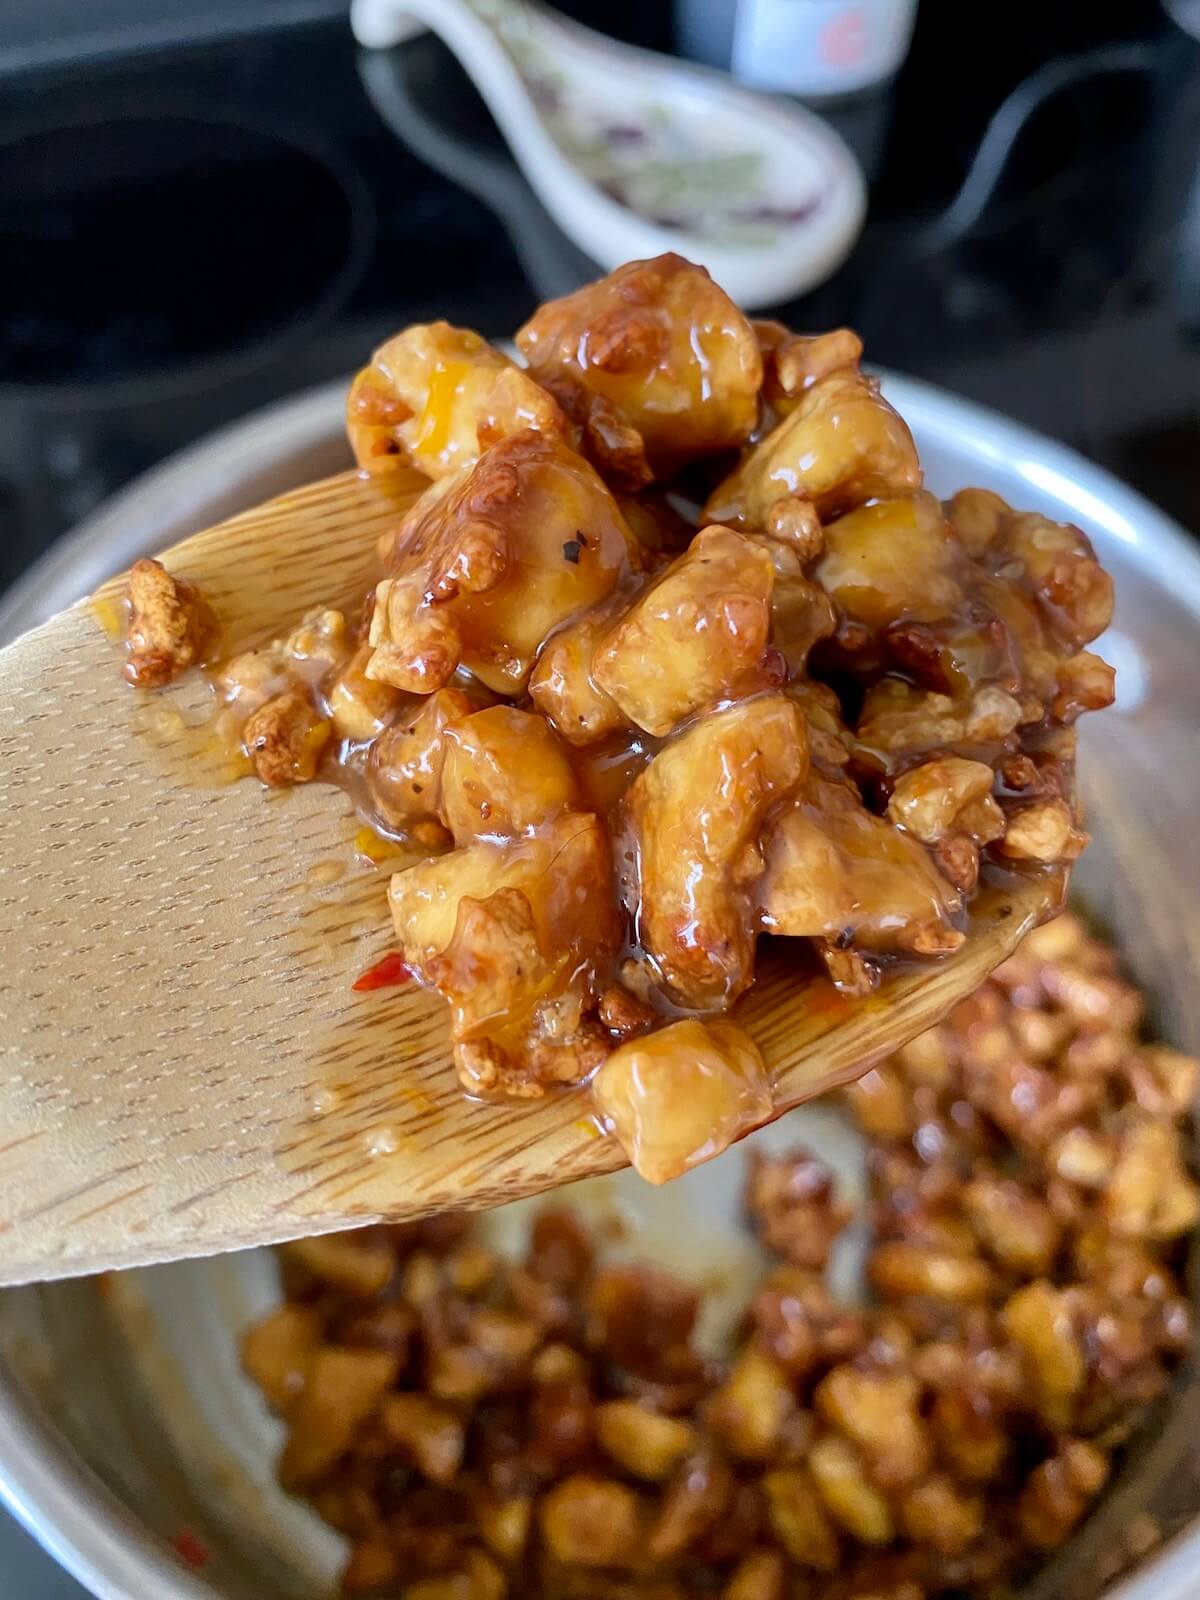 A wooden spoon holds up some of the finished baked orange tofu. The saucepan filled with the rest of the tofu is in the background.